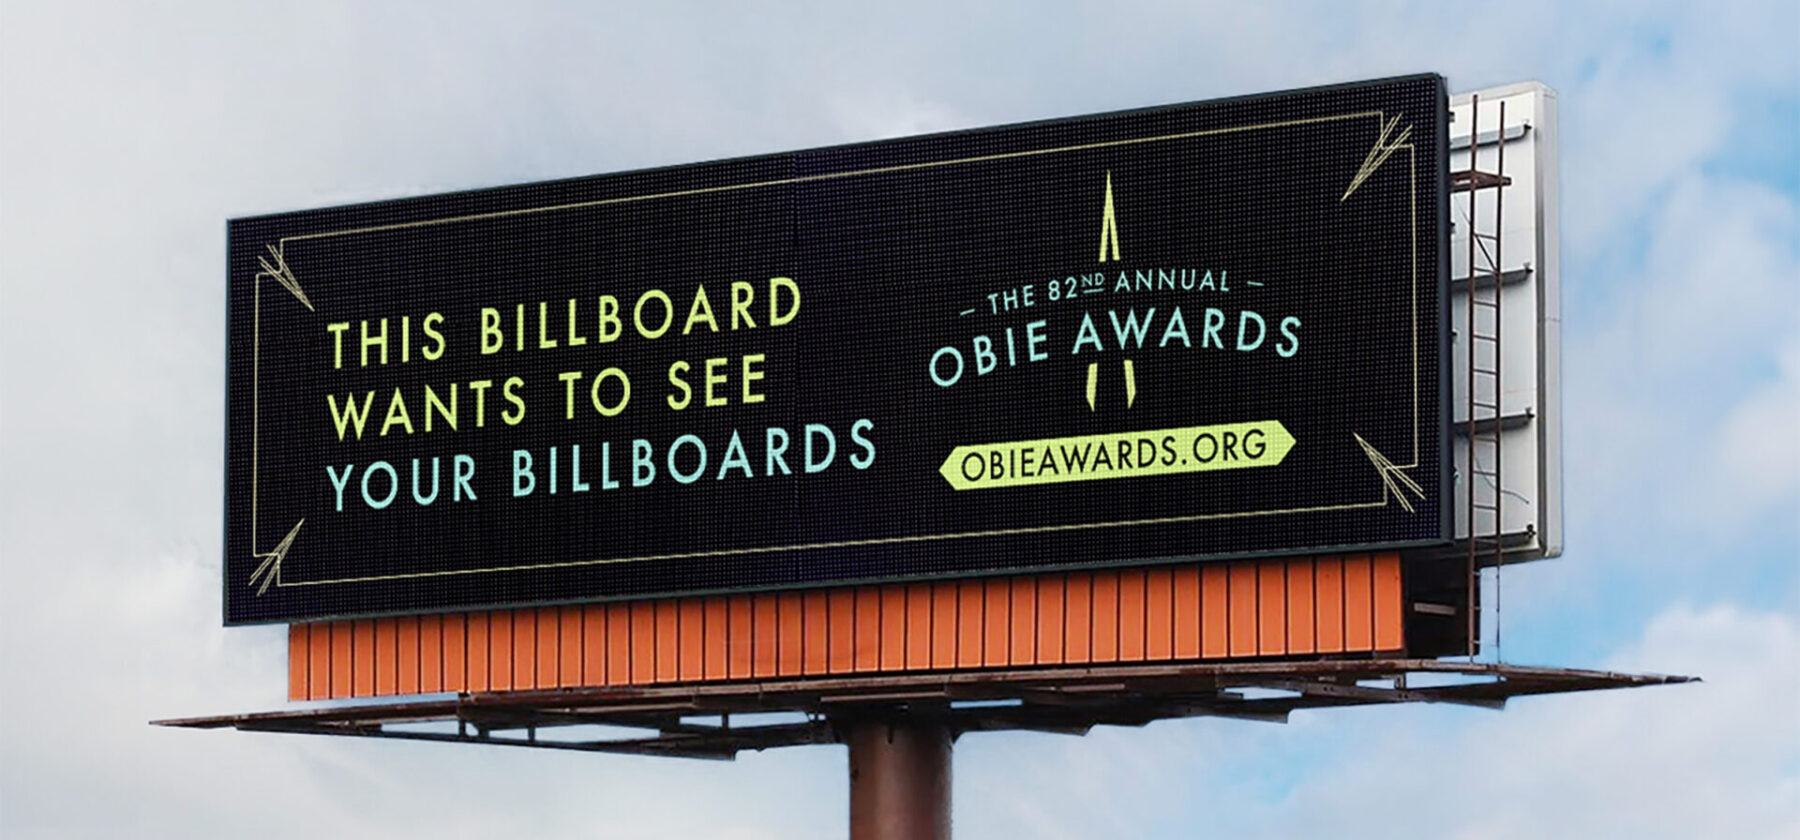 "This billboard wants to see your billboards" out of home bulletin design